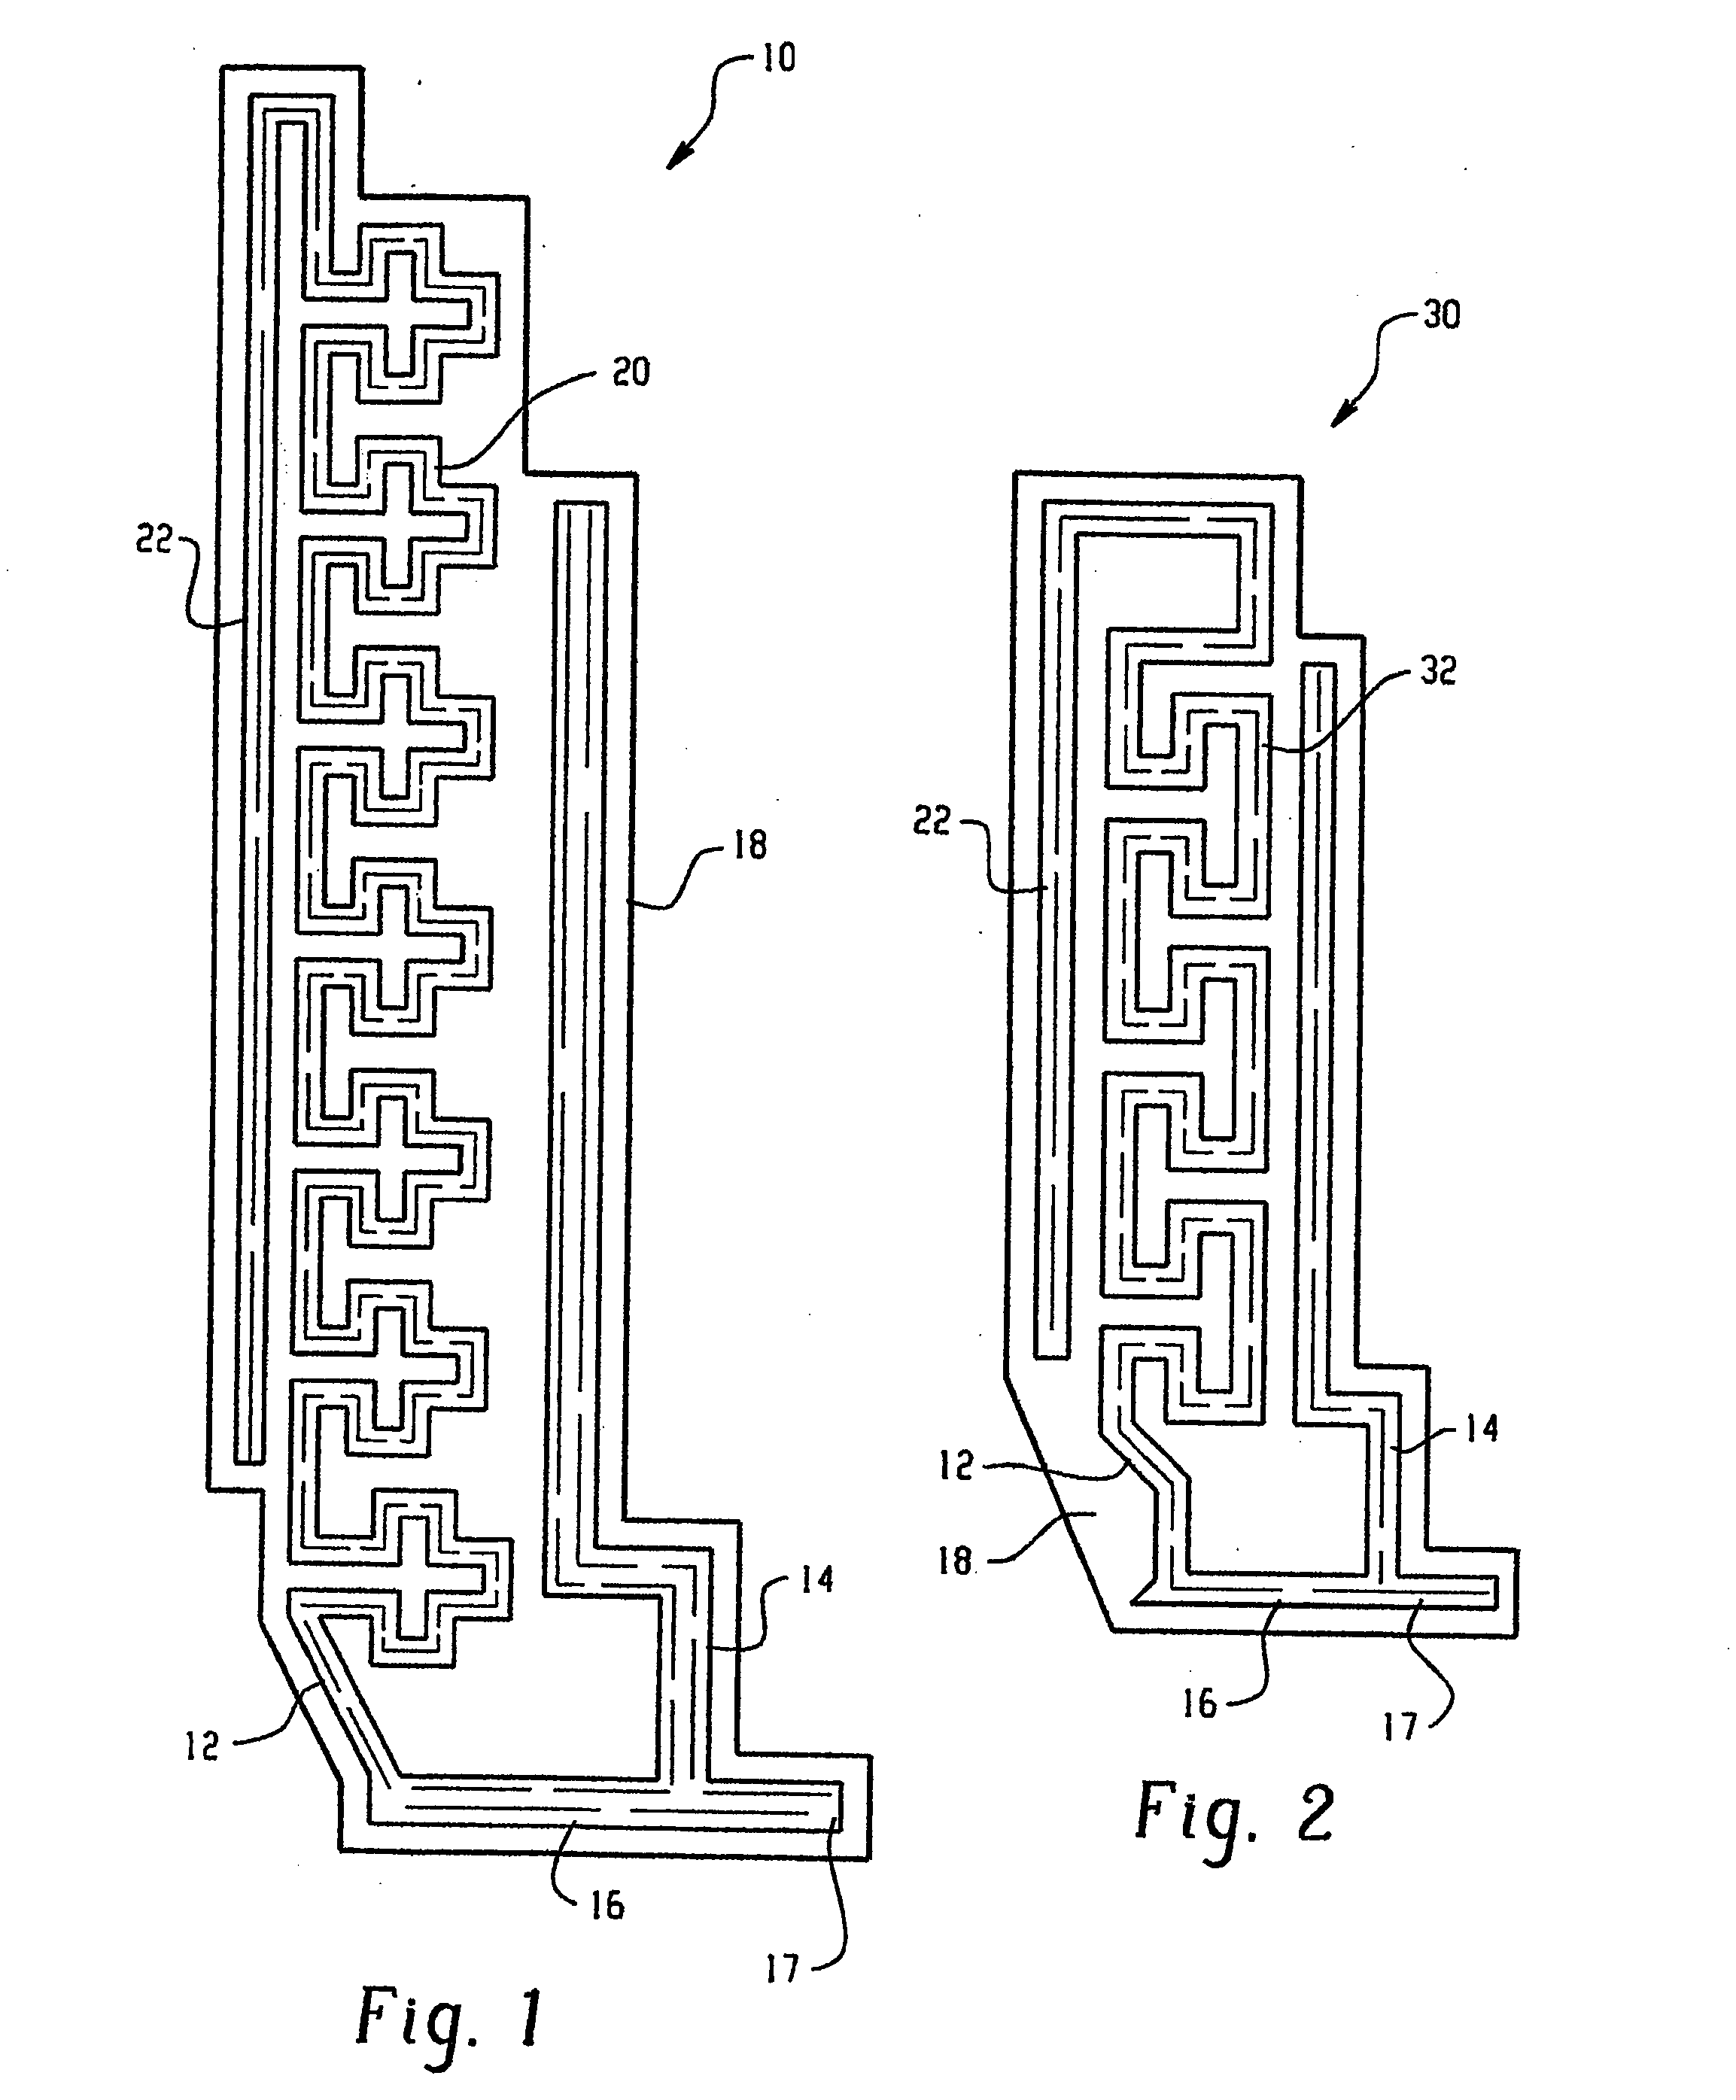 Multi-band monopole antenna for a mobile communications device